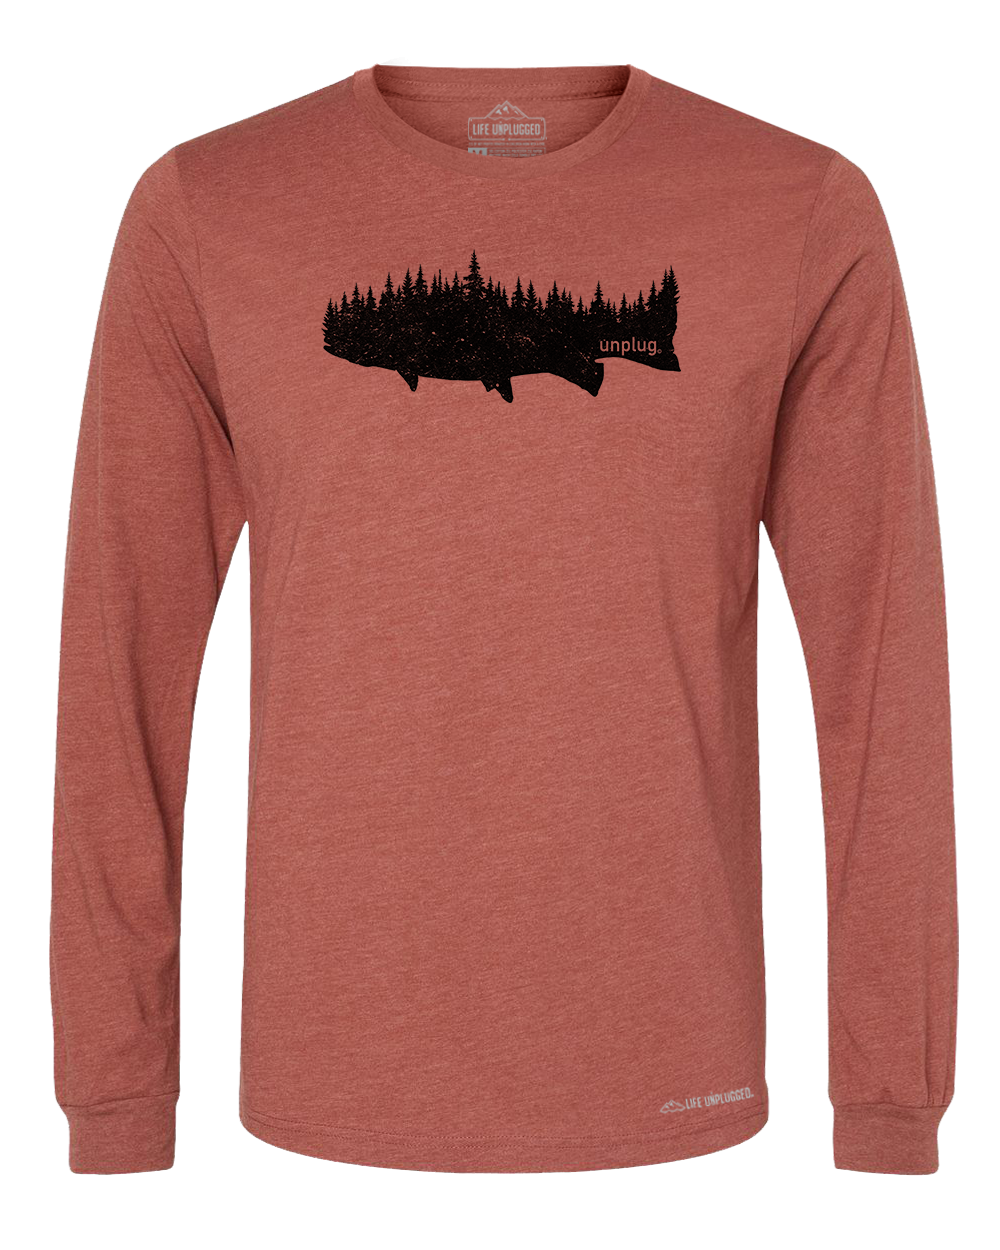 Trout In The Trees Premium Polyblend Long Sleeve T-Shirt - Life Unplugged